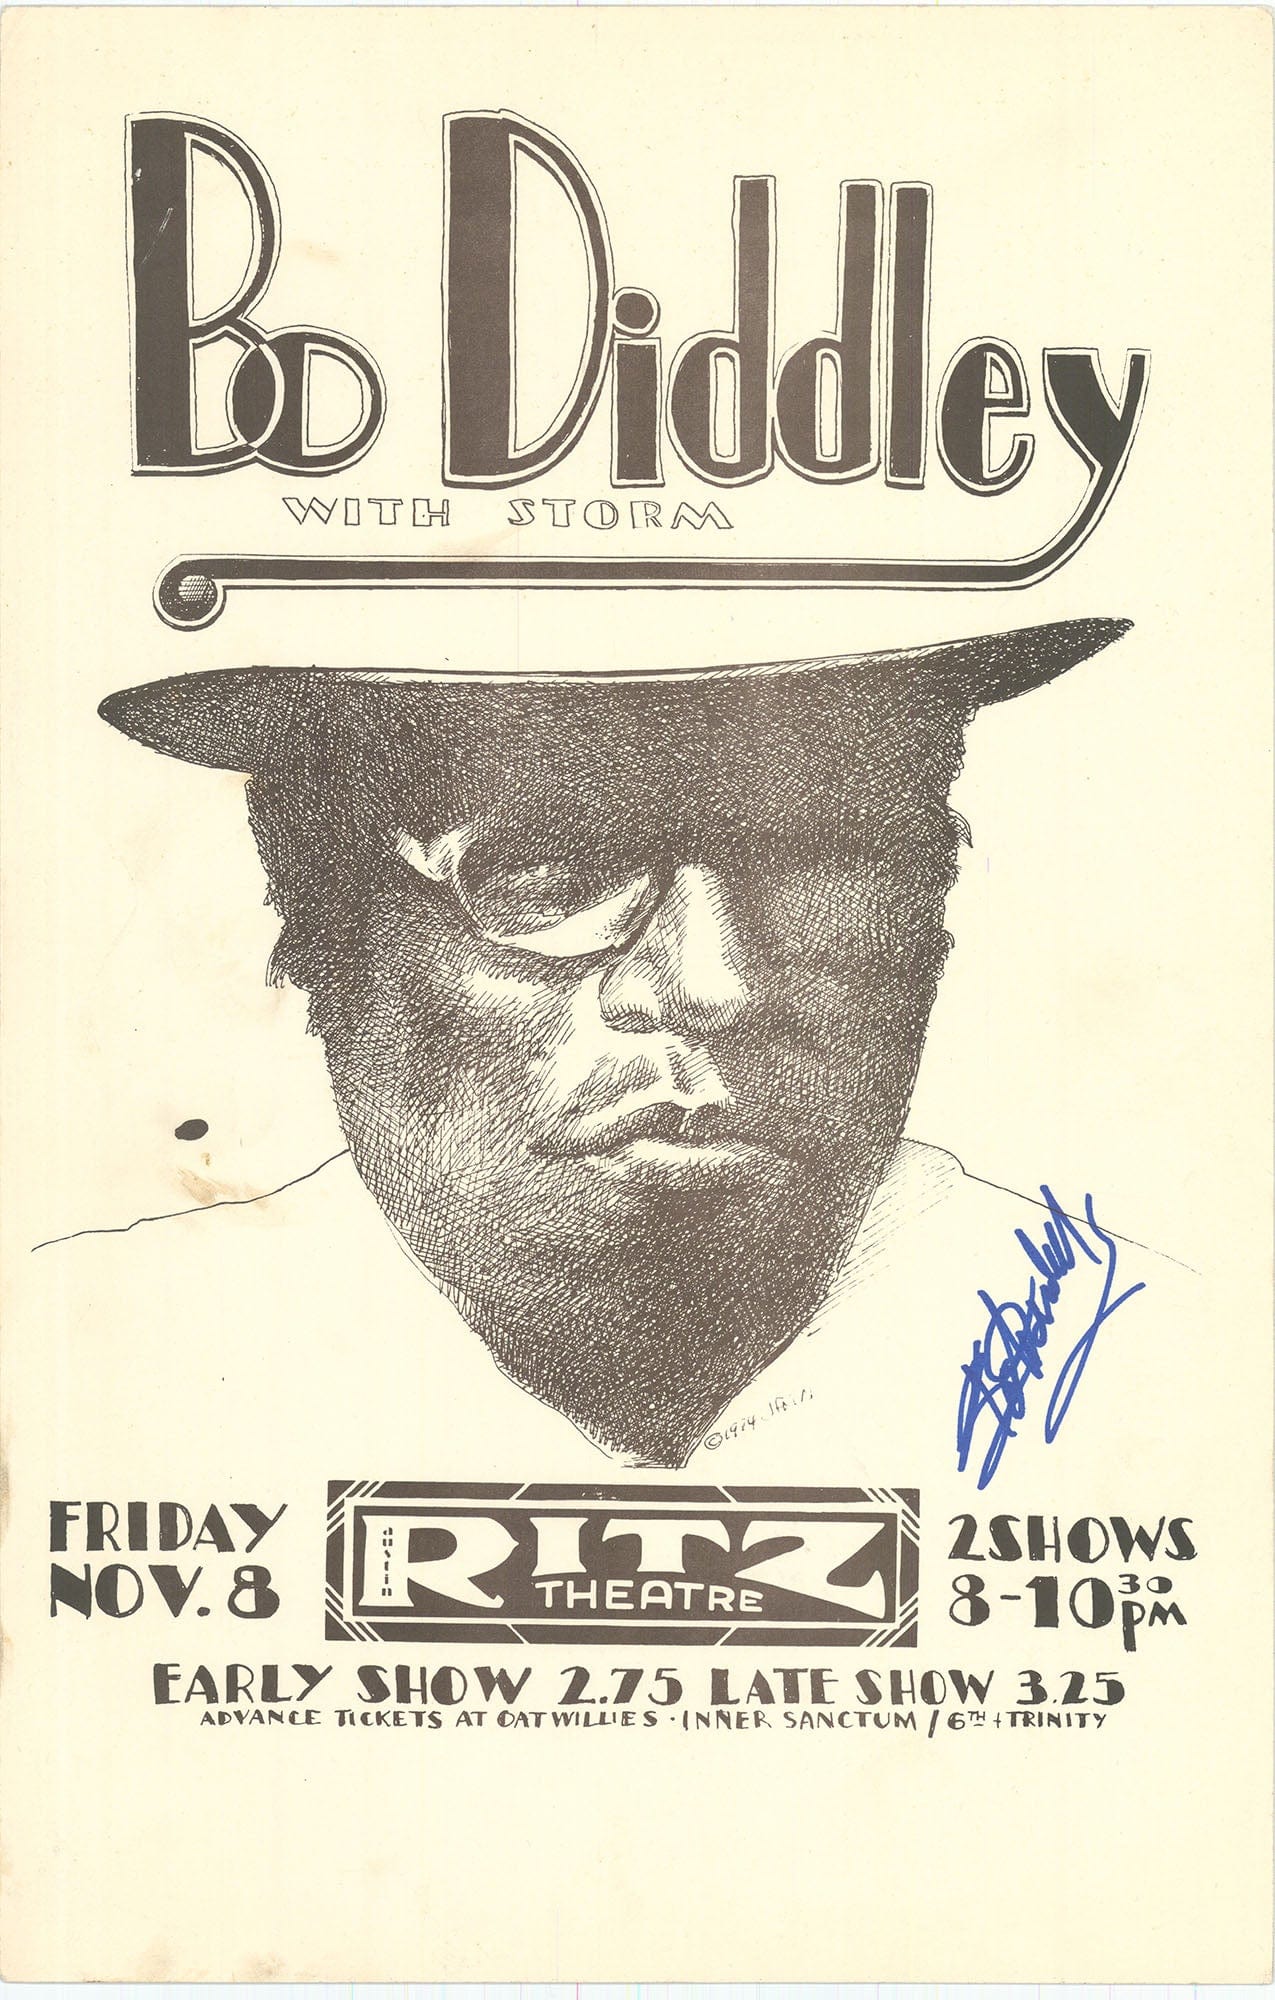 Autographed Bo Diddley Vintage Poster by Jim Franklin